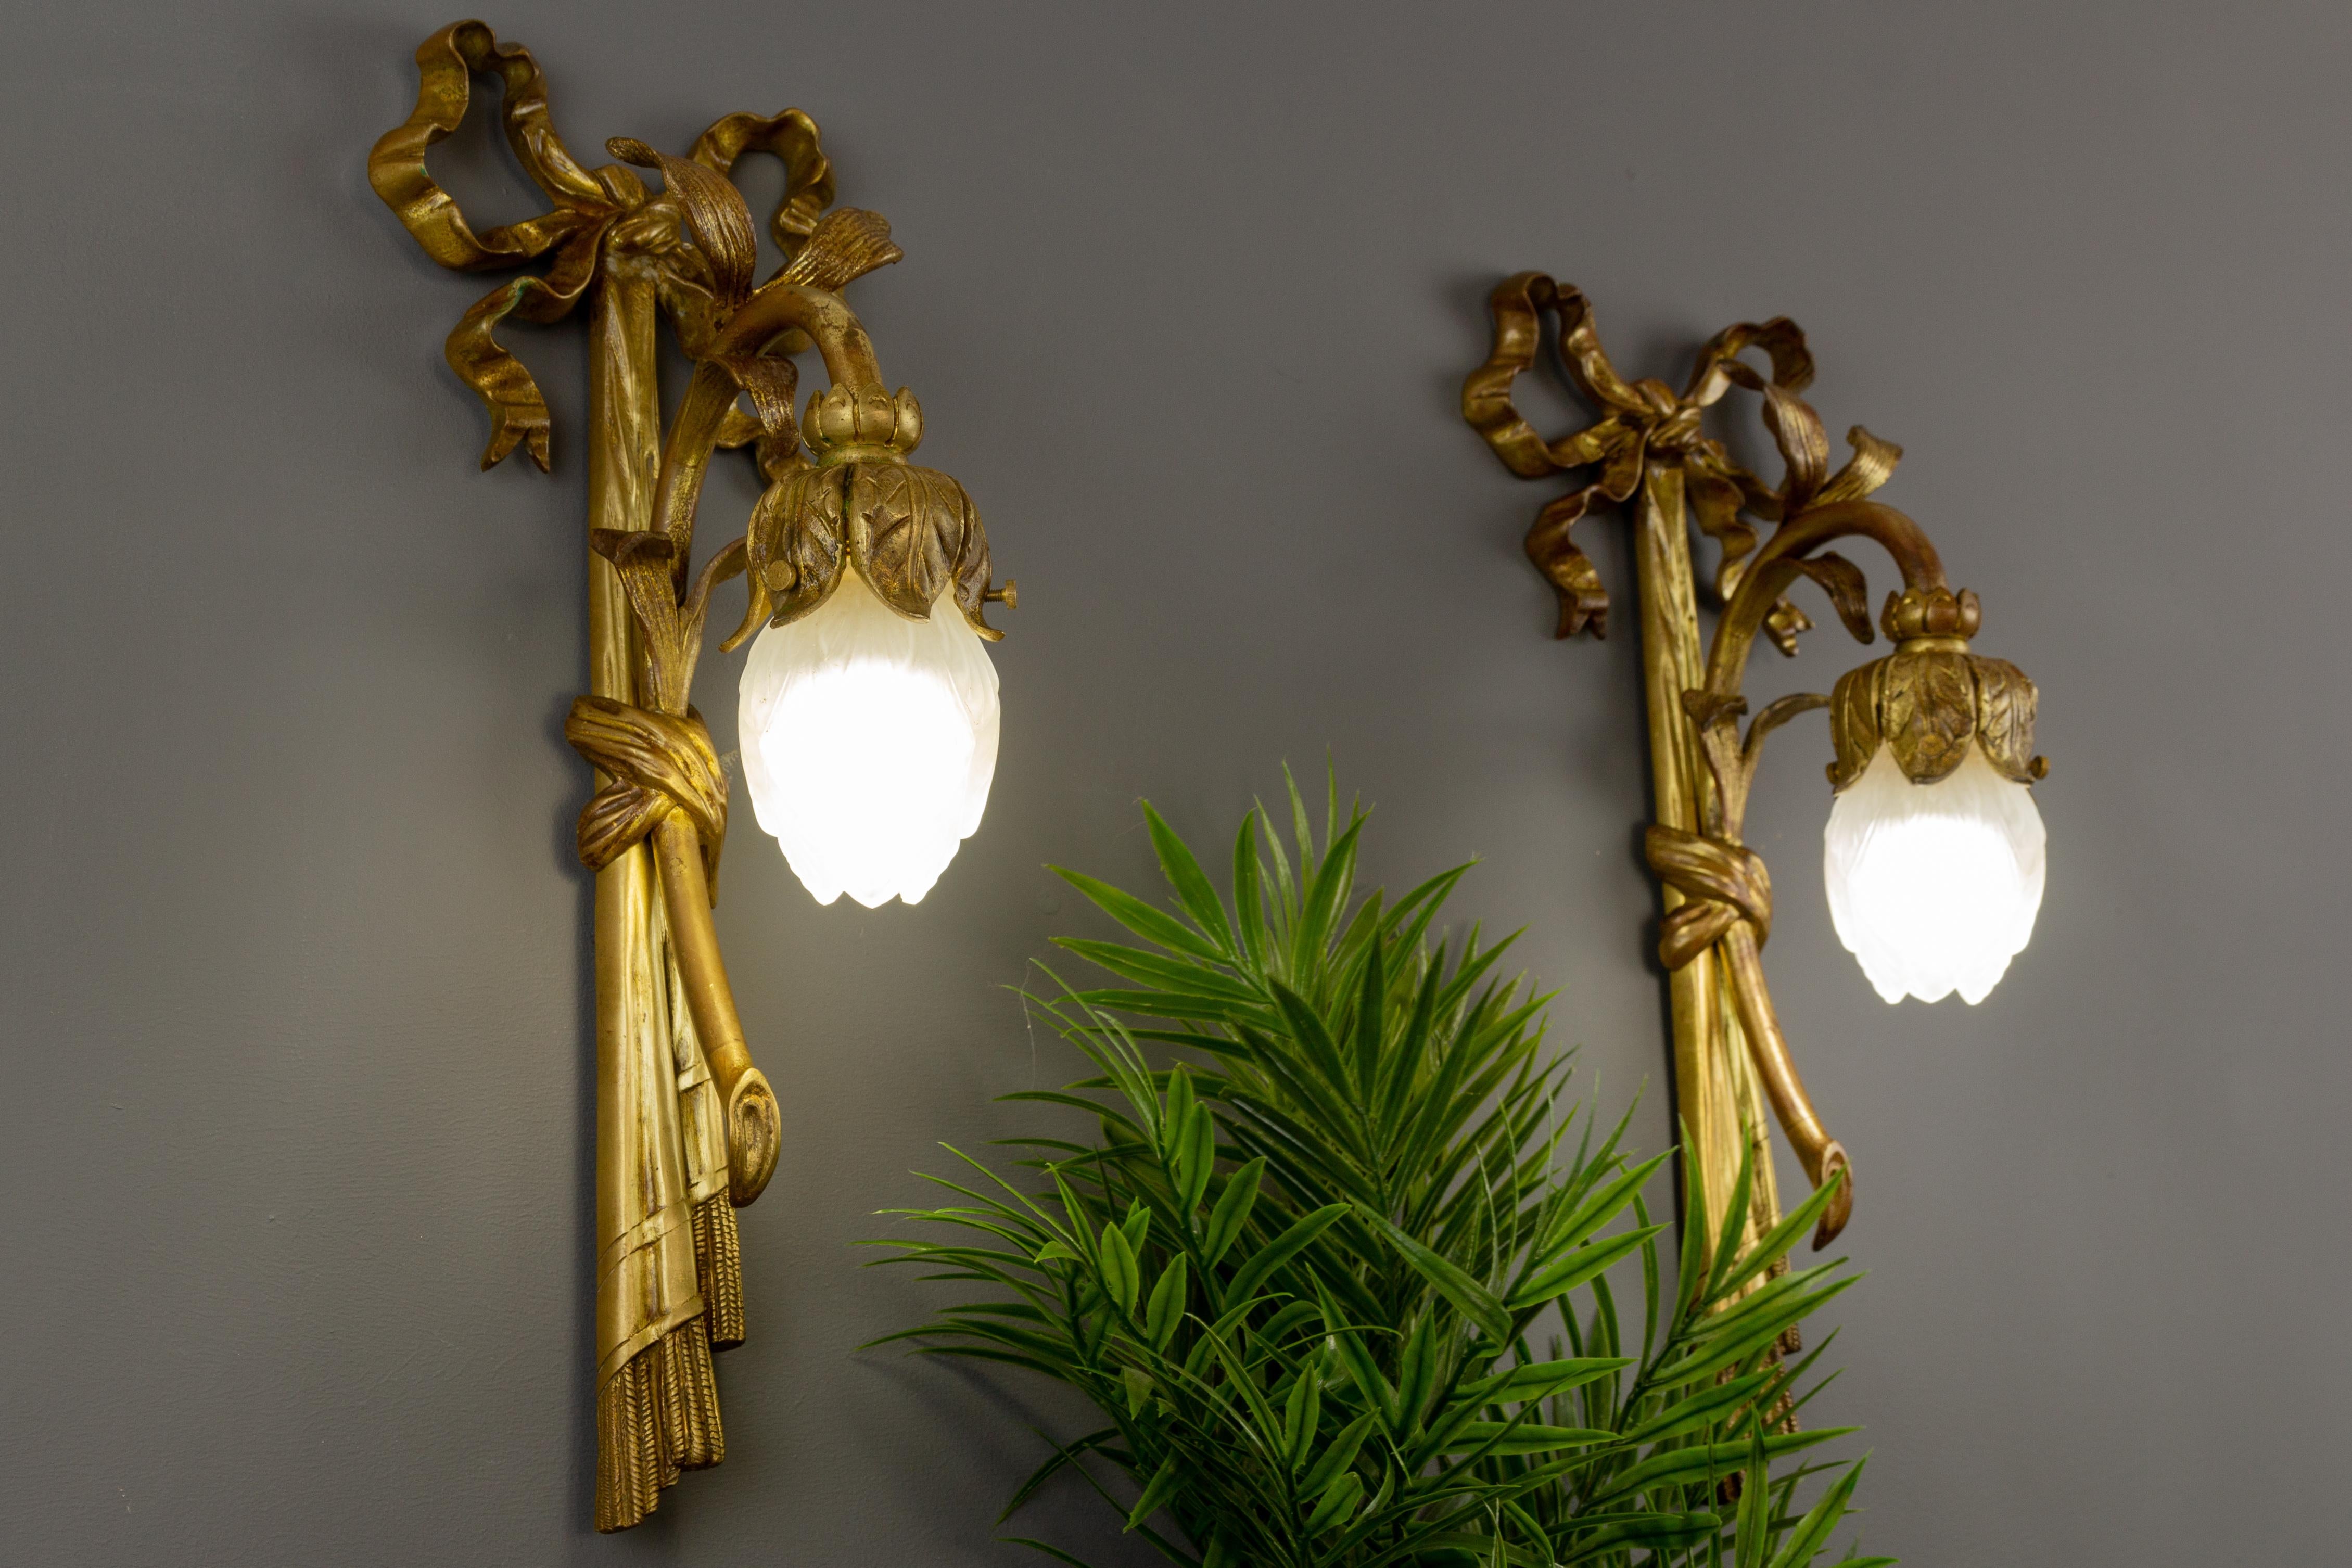 An adorable pair of French Louis XVI-style gilded bronze wall lights in the shape of a flower, tied with a beautiful ribbon and tassel on top of each sconce.
Each has a white frosted glass lampshade in a shape of a flower bud and one socket for an